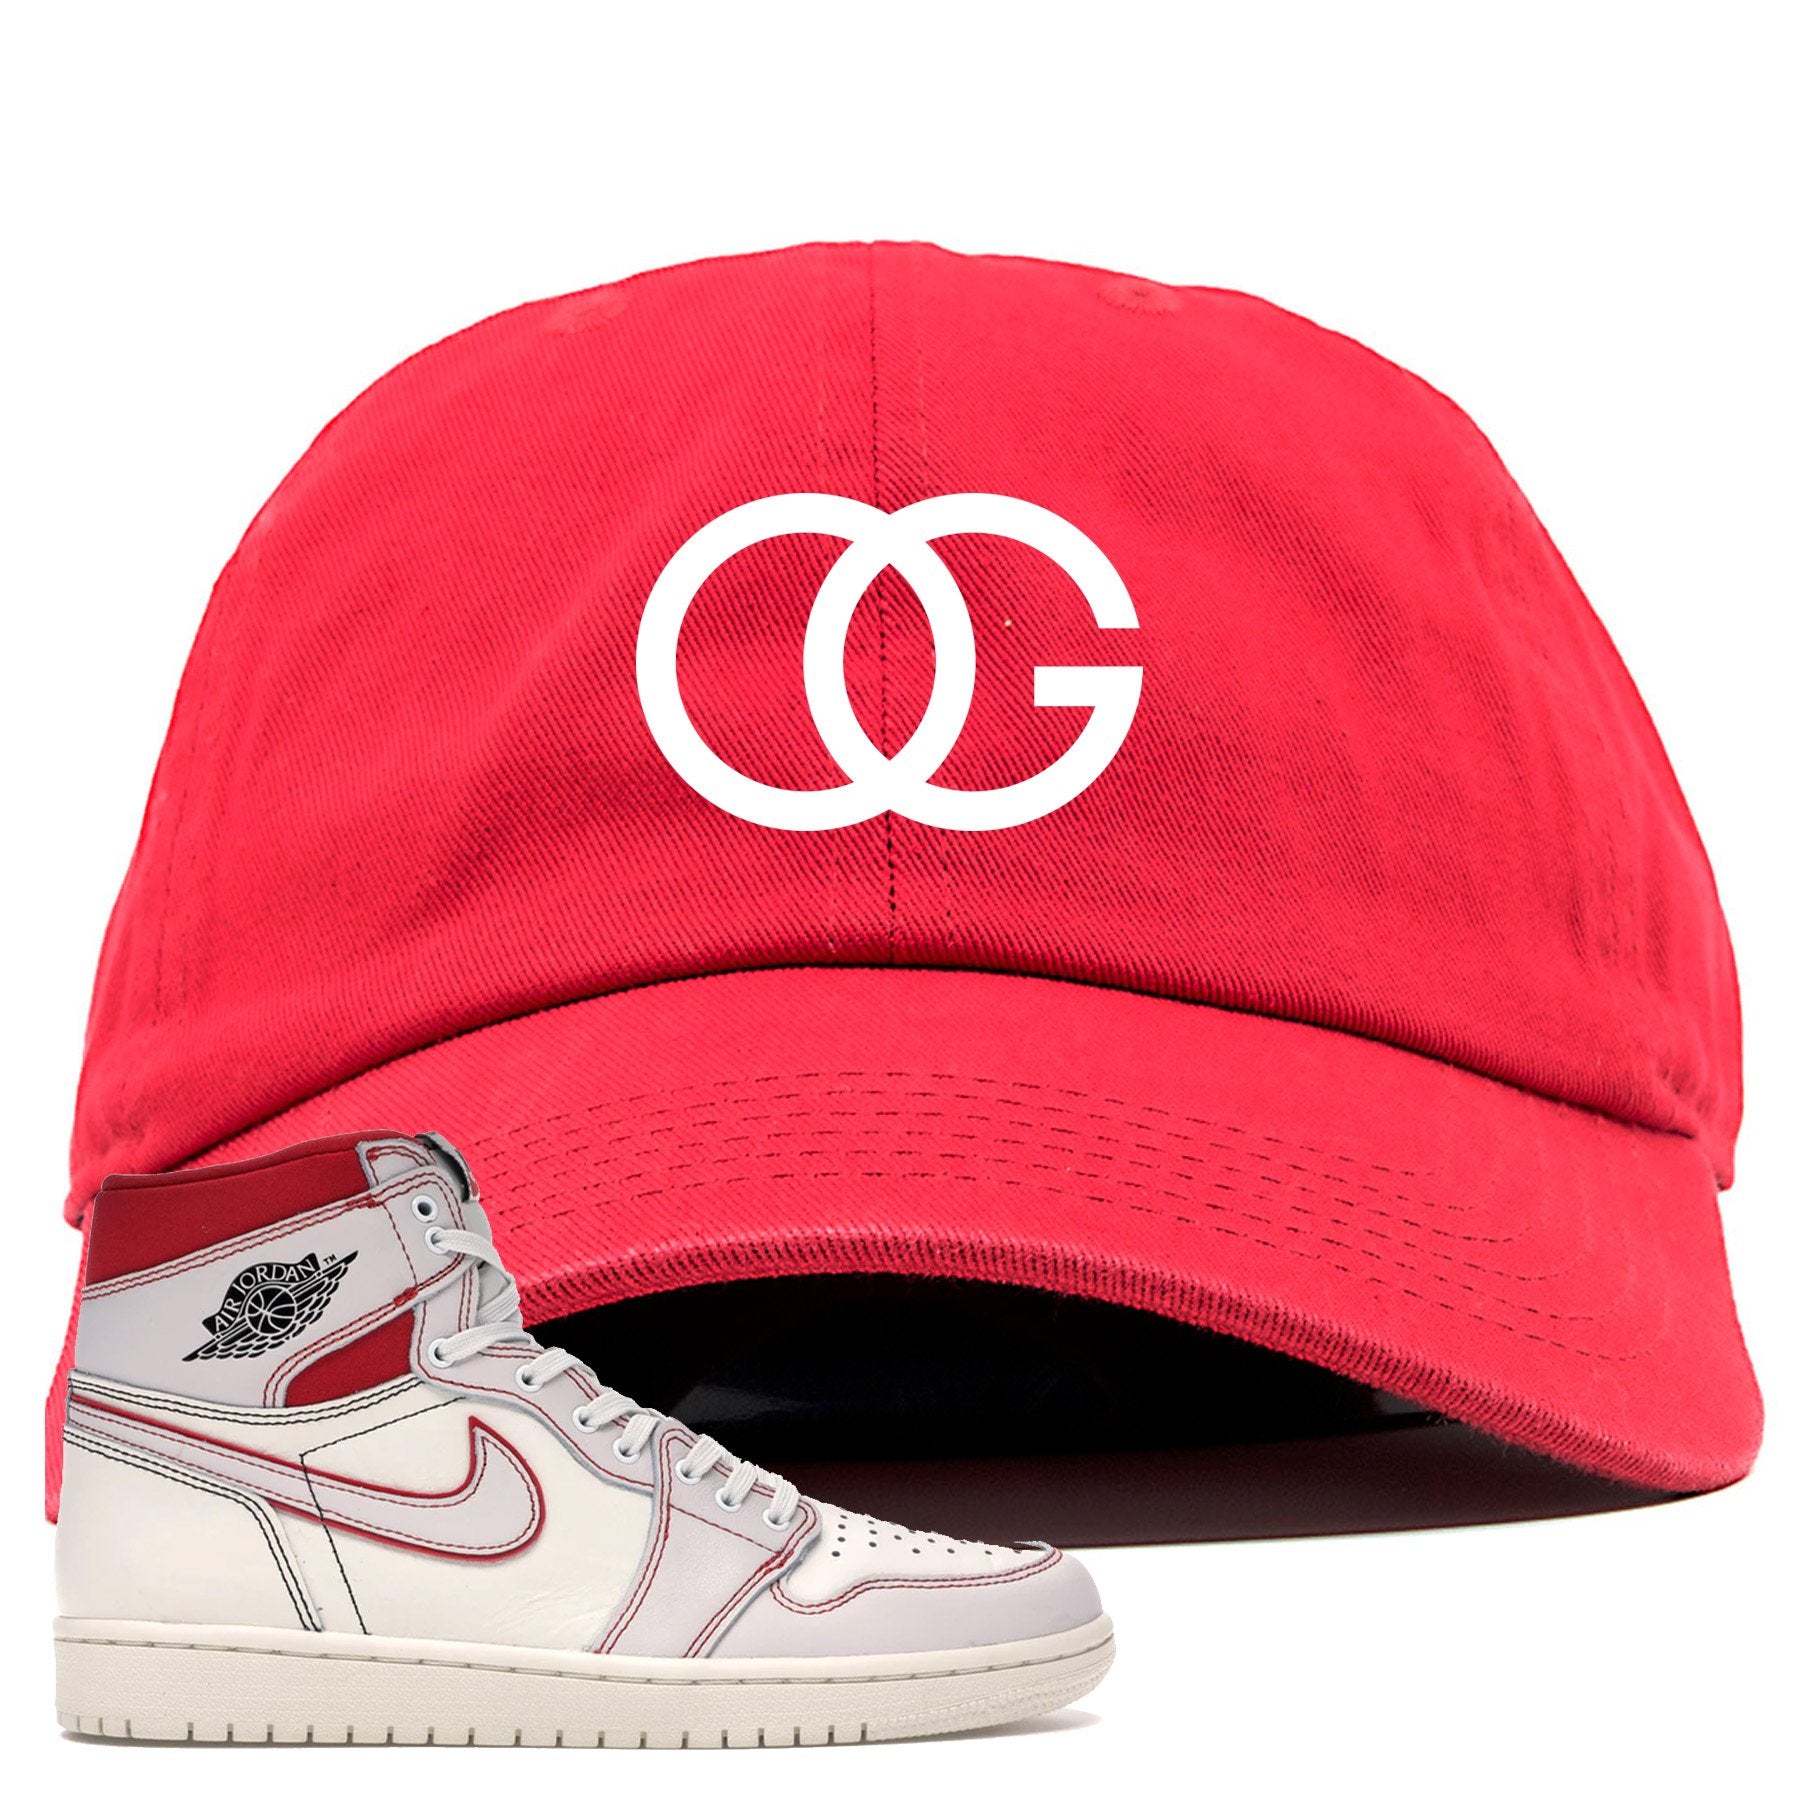 Red and white hat to match the white and red High Retro Jordan 1 shoes